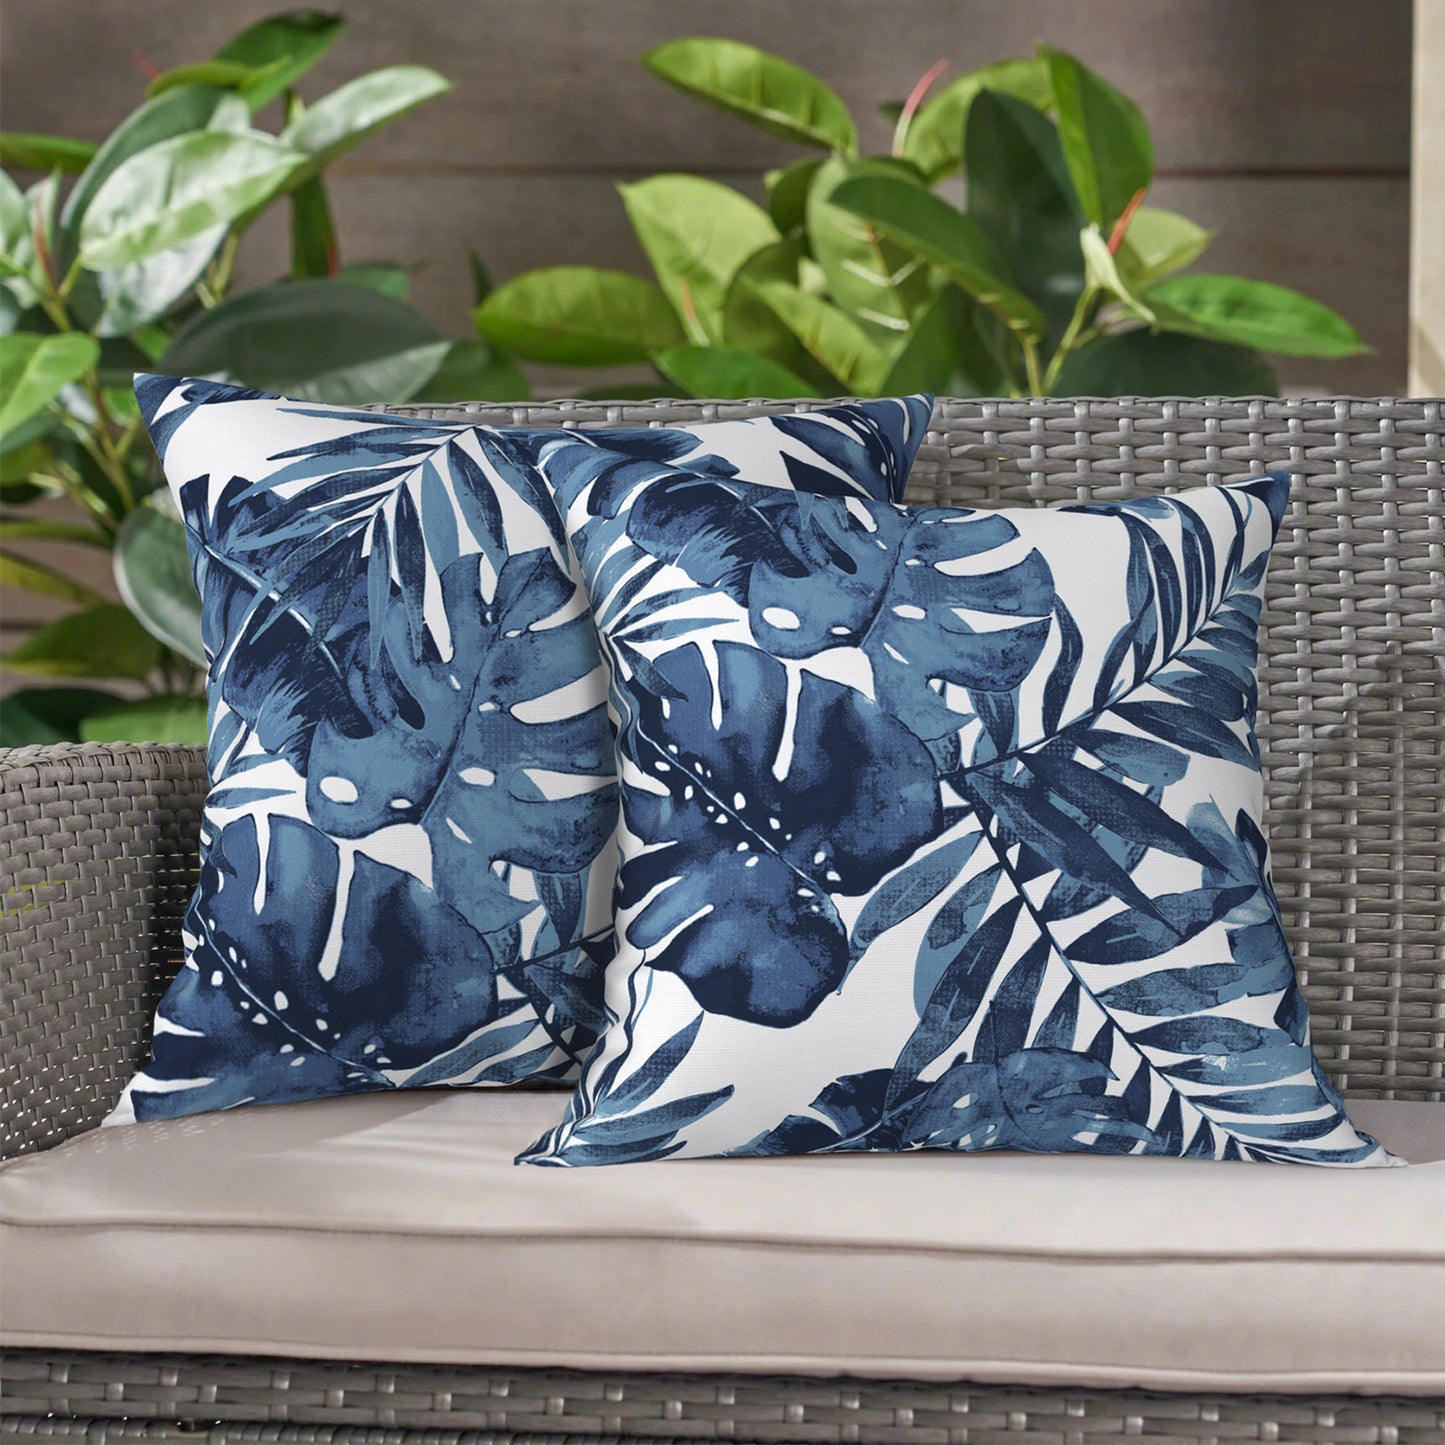 Melody Elephant Outdoor Throw Pillow Covers Pack of 2, Decorative Water Repellent Square Pillow Cases 18x18 Inch, Patio Pillowcases for Home Patio Furniture Use, Palm Blue